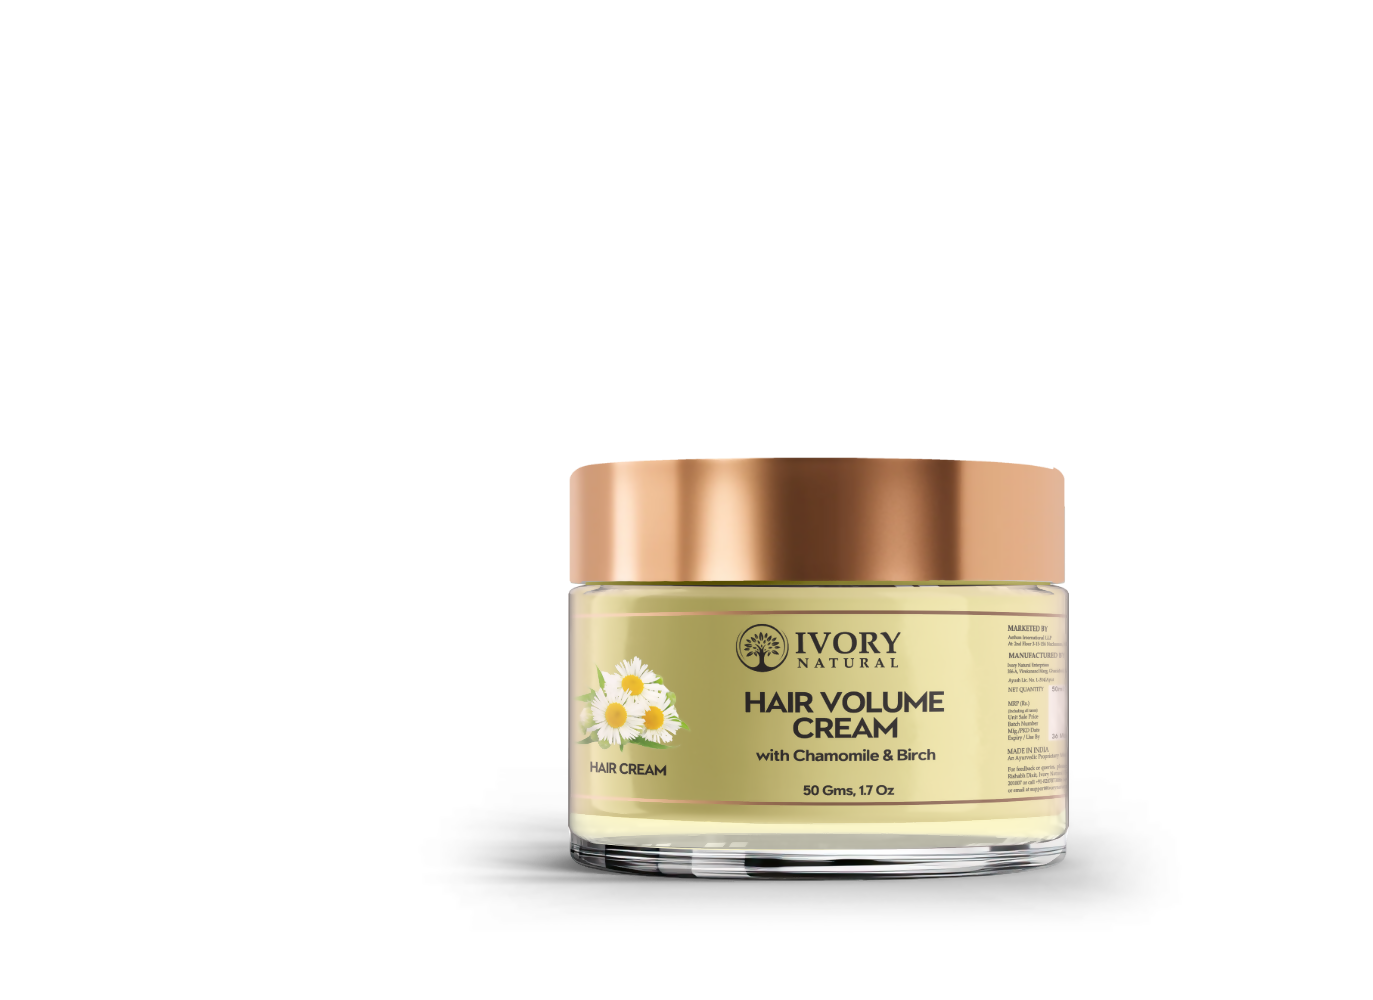 Ivory Natural Hair Volume Cream For Thicker, Fuller Looking Hair